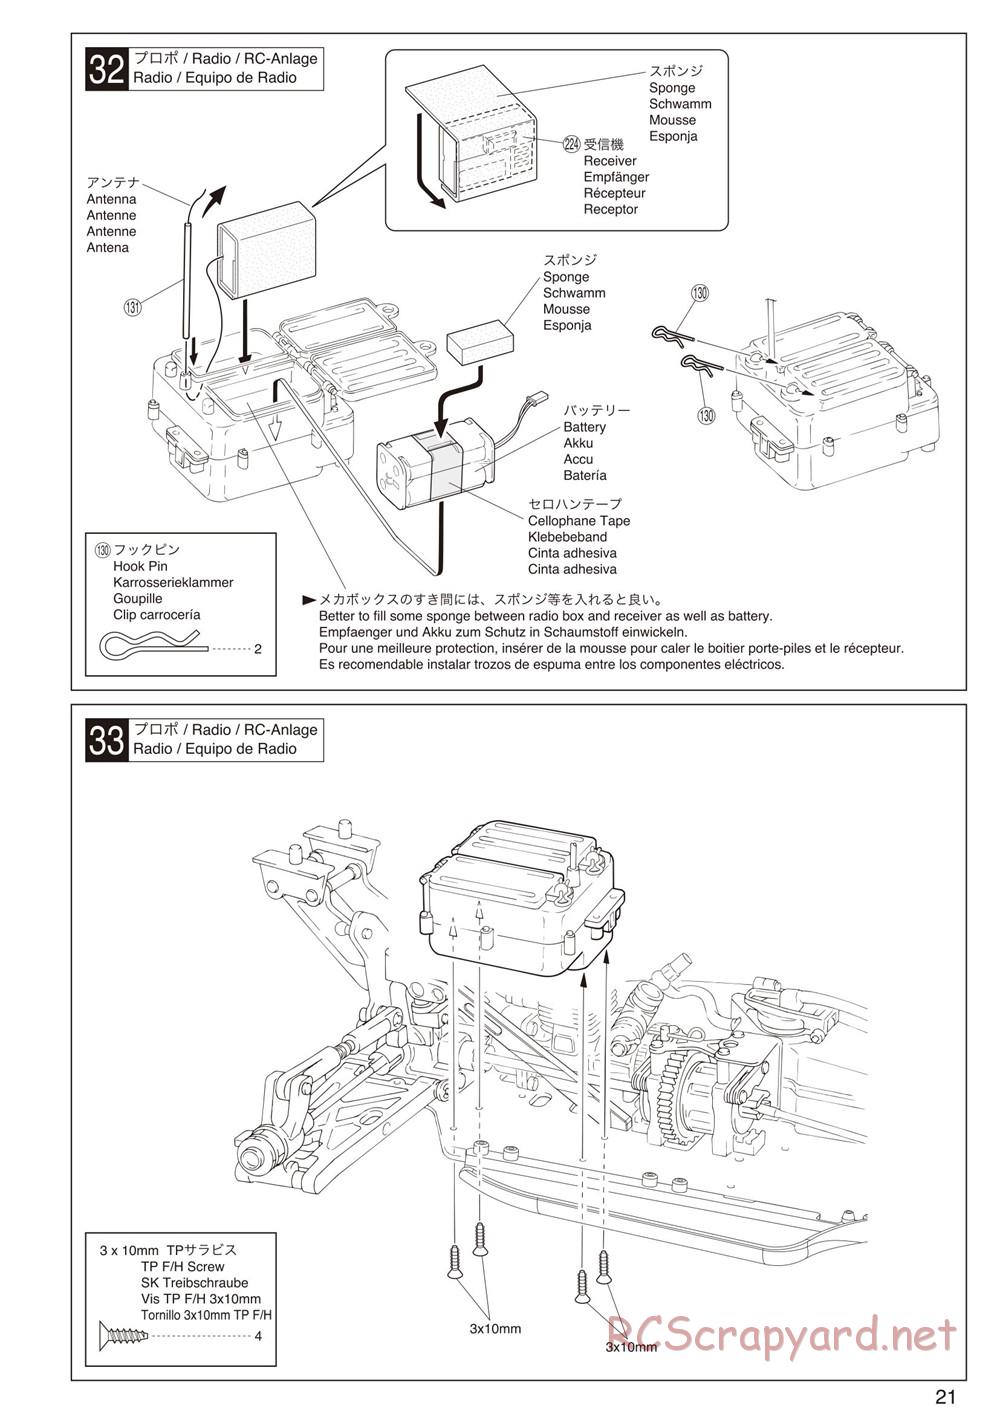 Kyosho - Inferno Neo 2.0 - Manual - Page 21